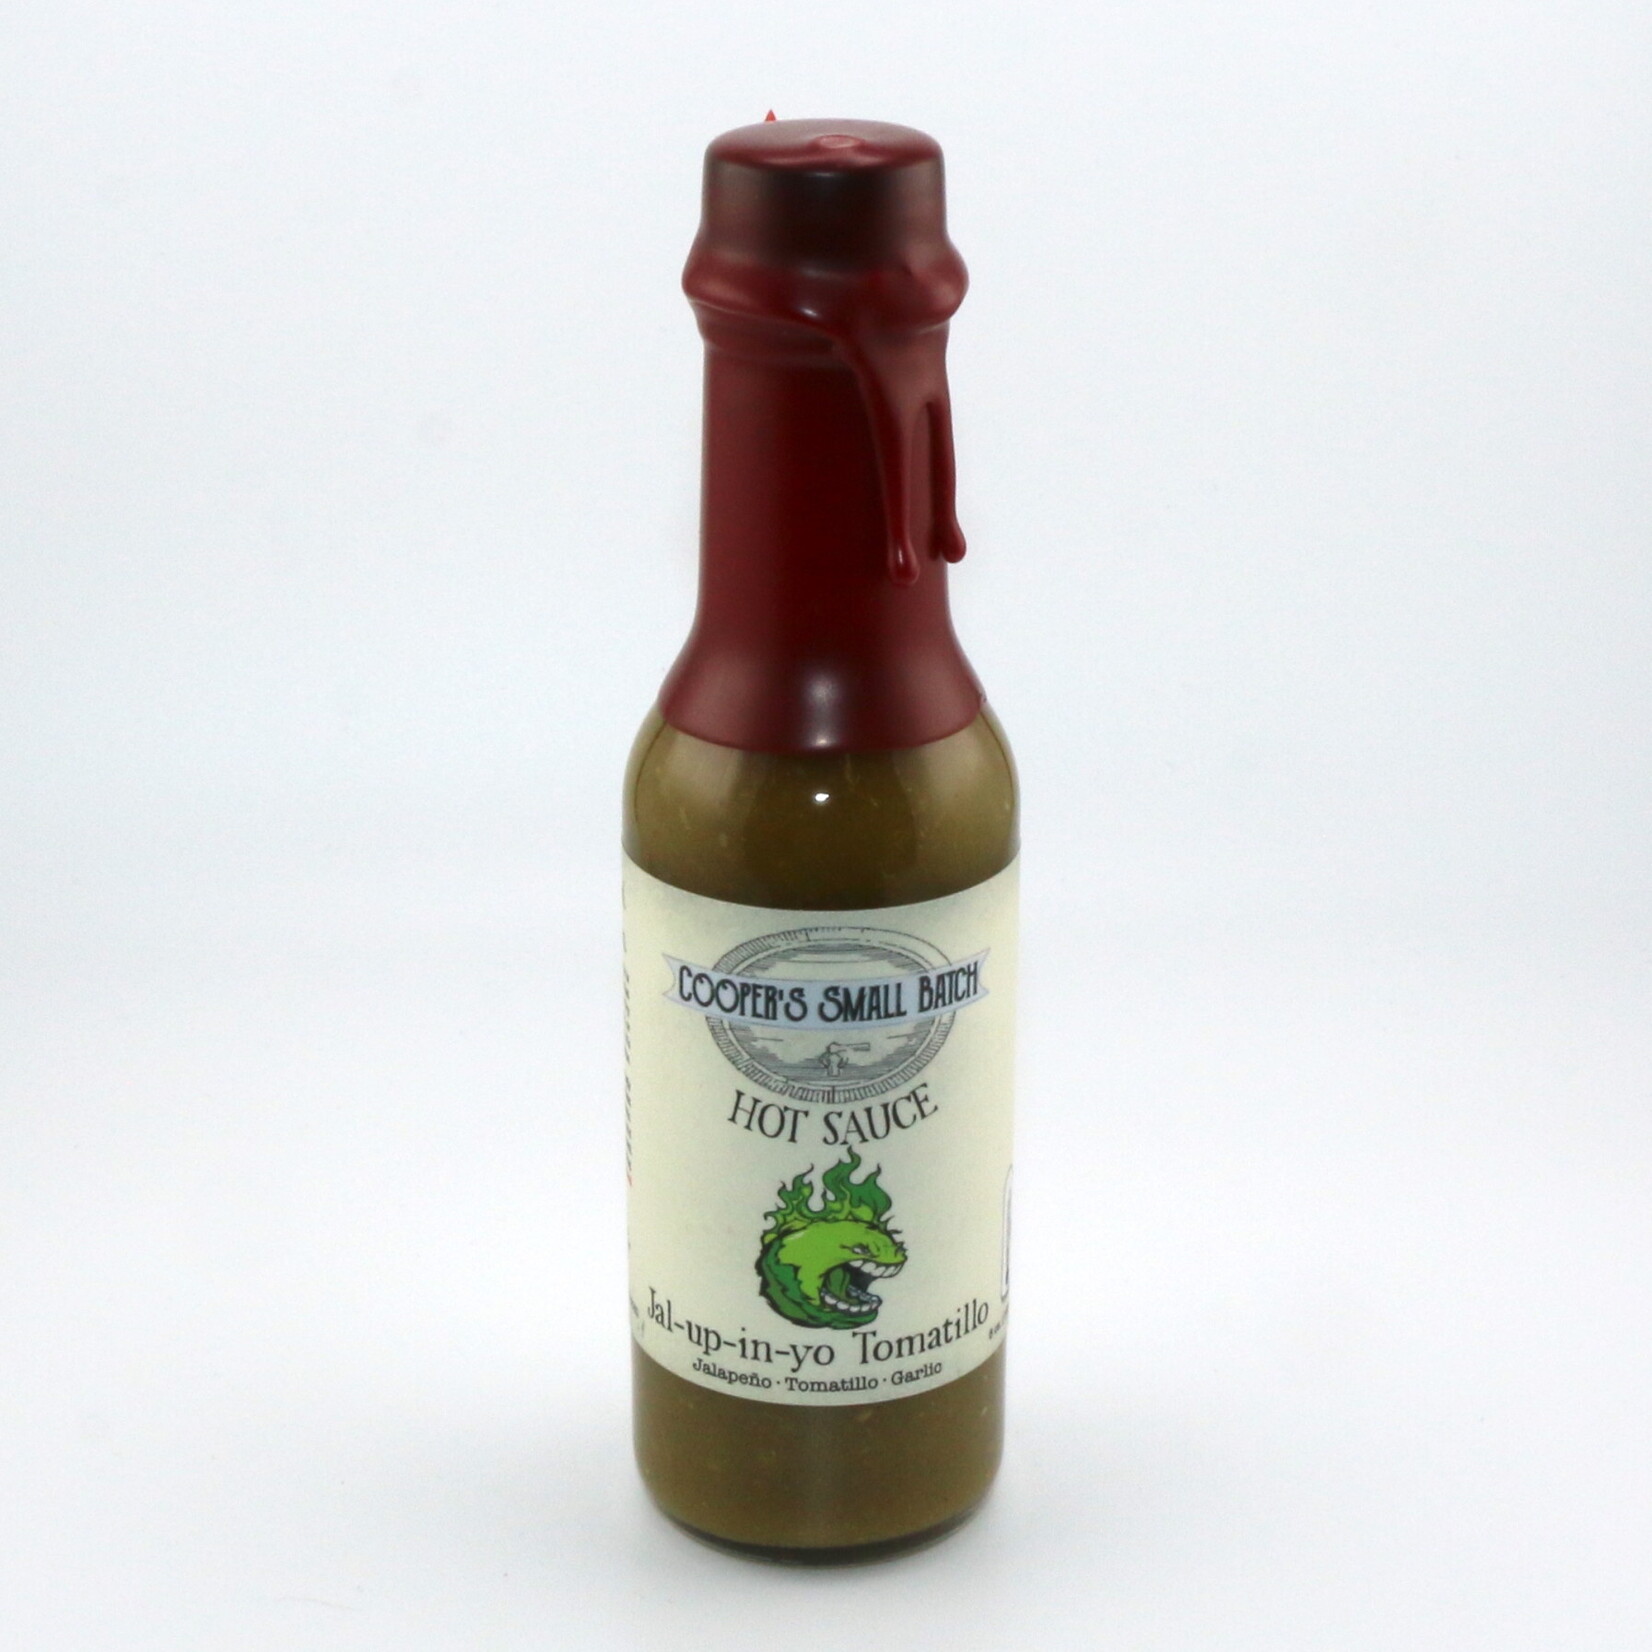 Coopers Small Batch Cooper's Small Batch Tomatillo Hot Sauce